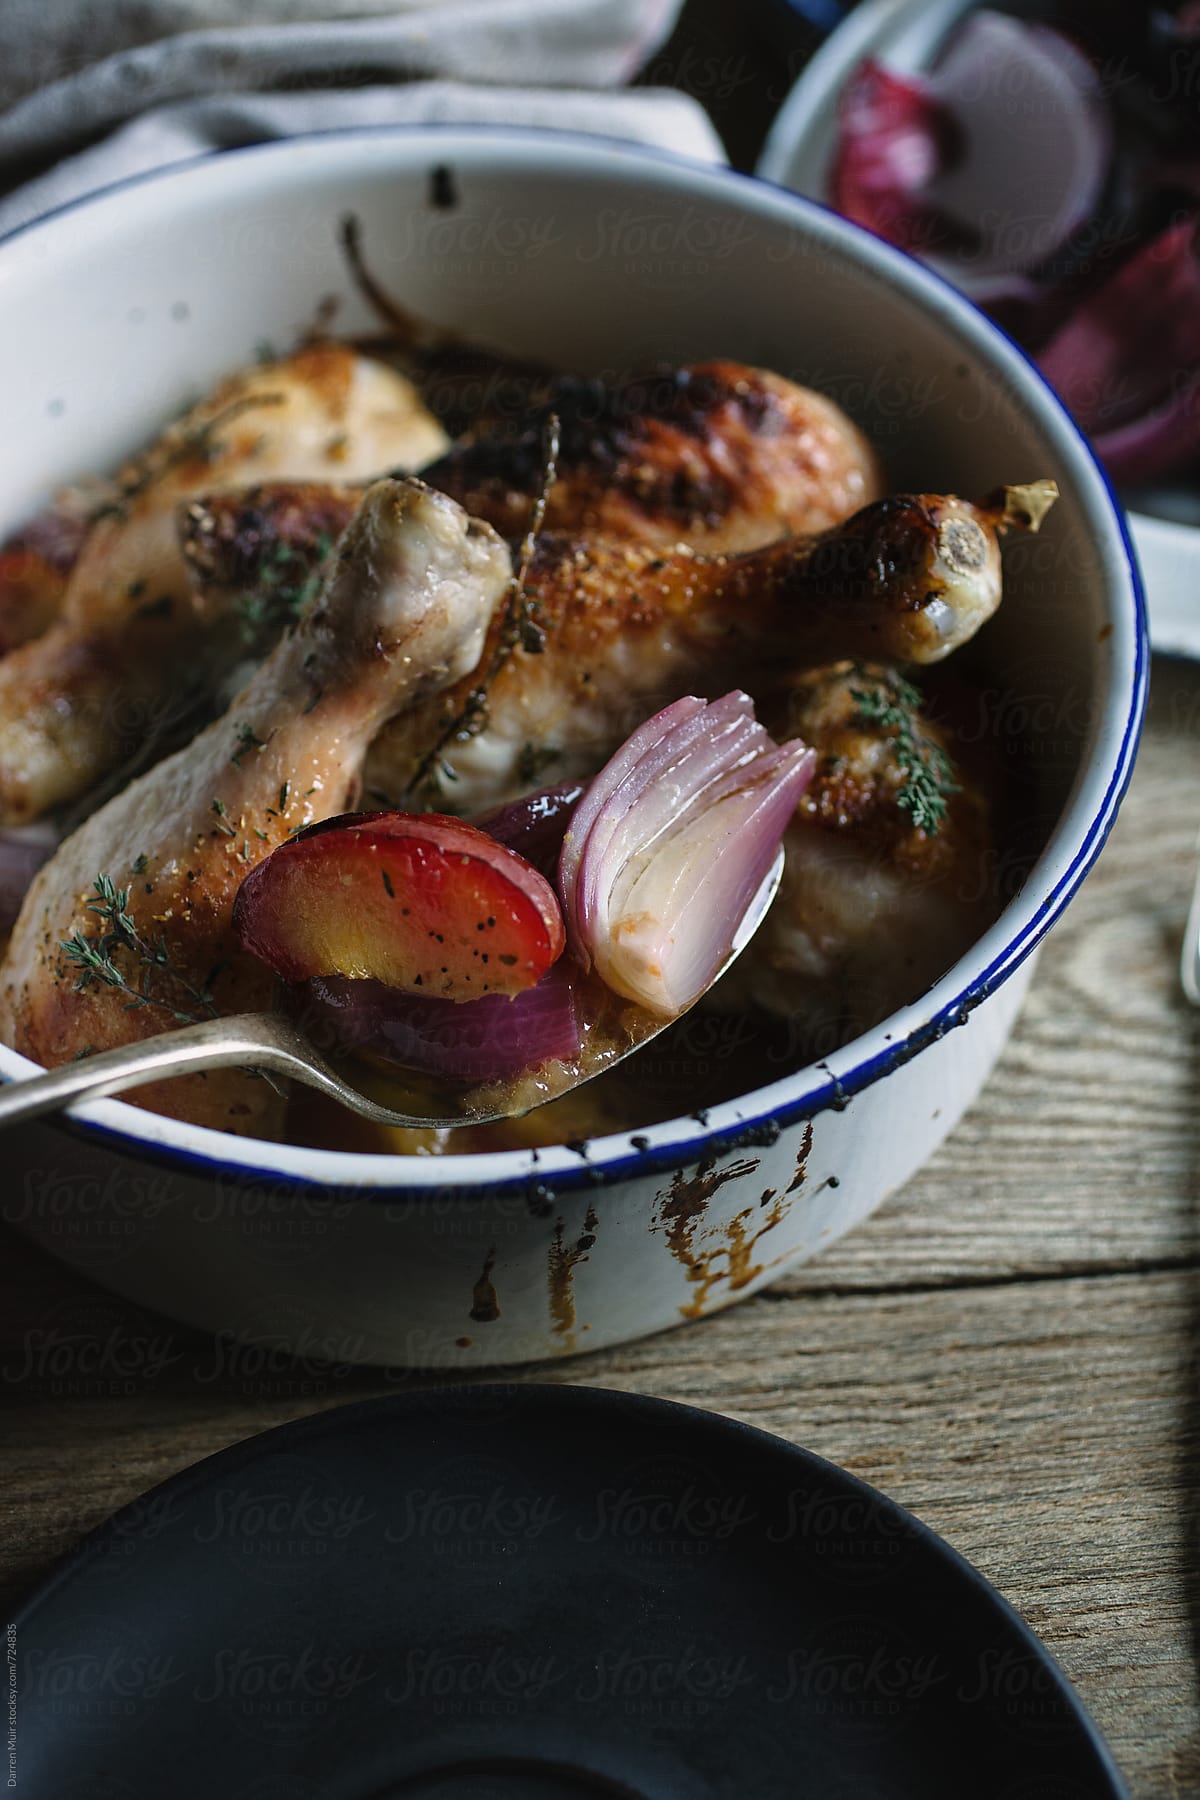 Rustic meal of chicken with red onion and plums in a pot.